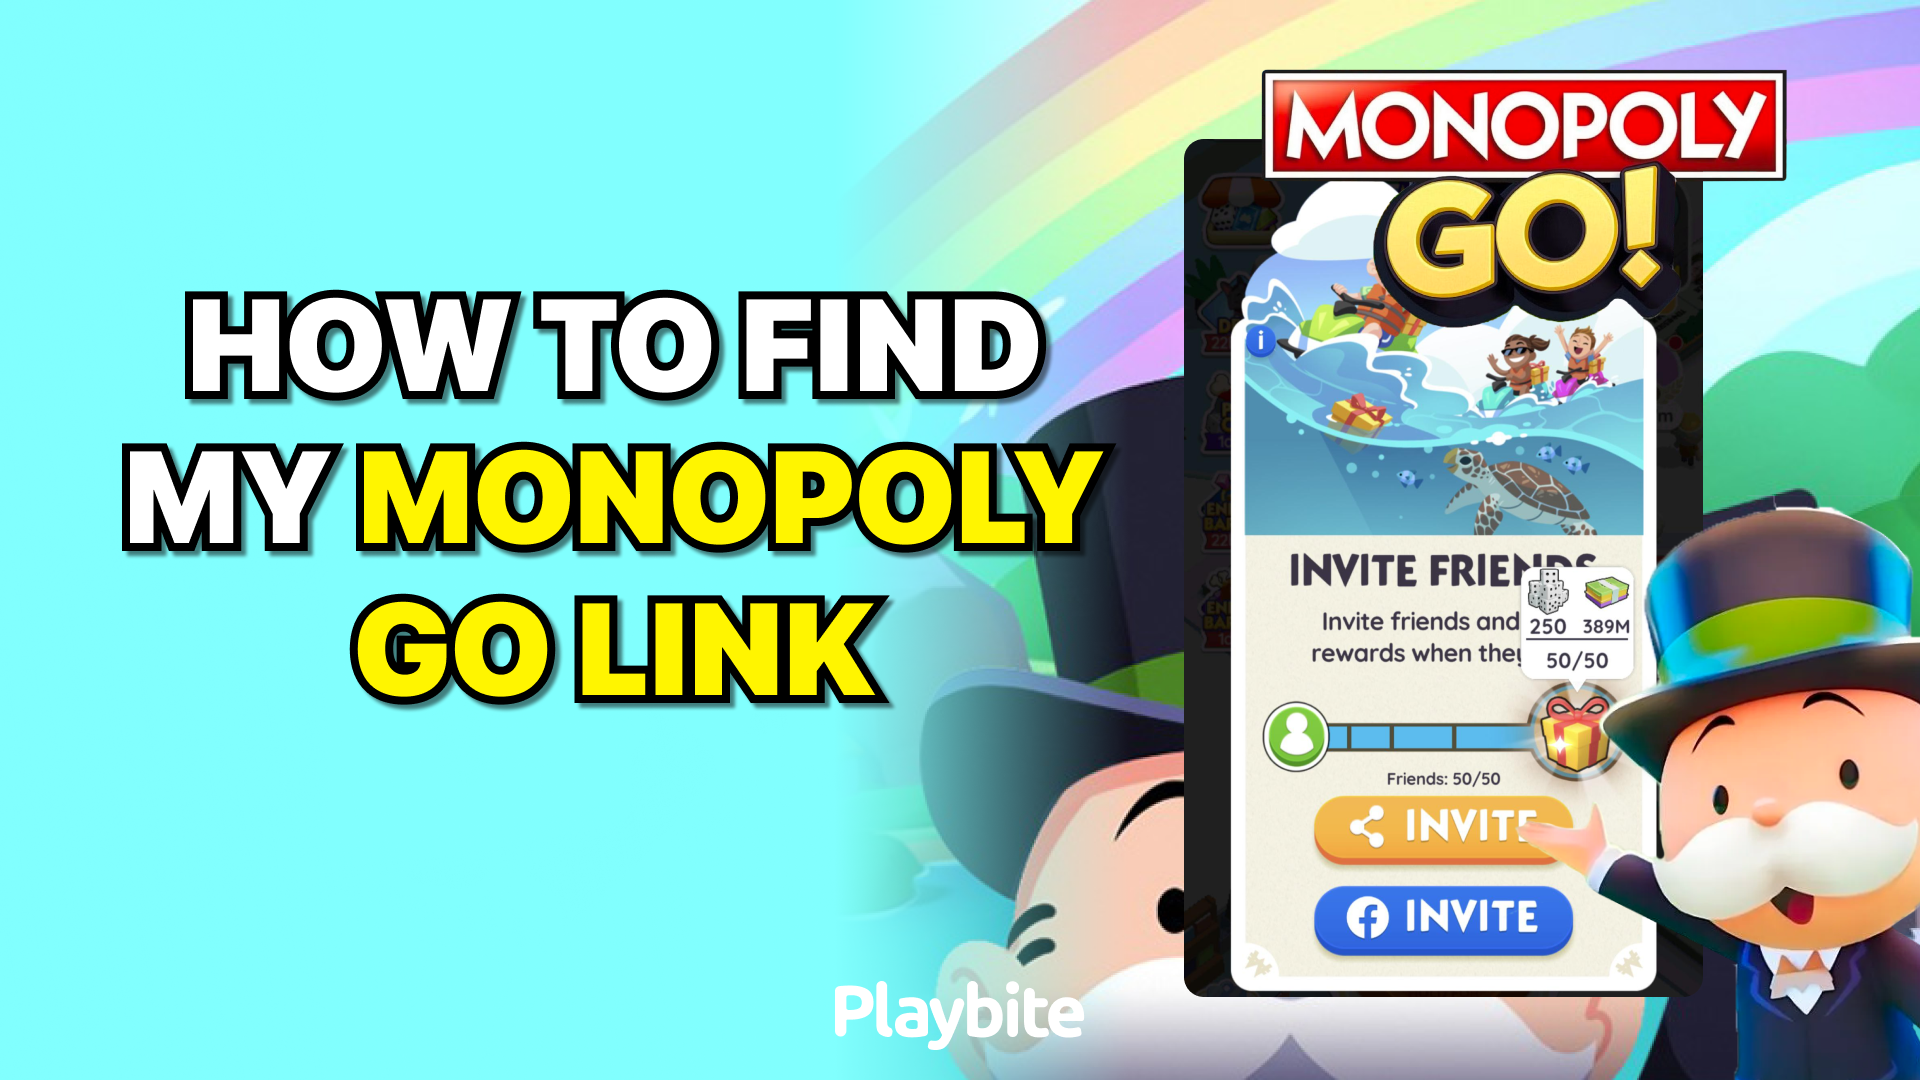 How to Find My Monopoly Go Link